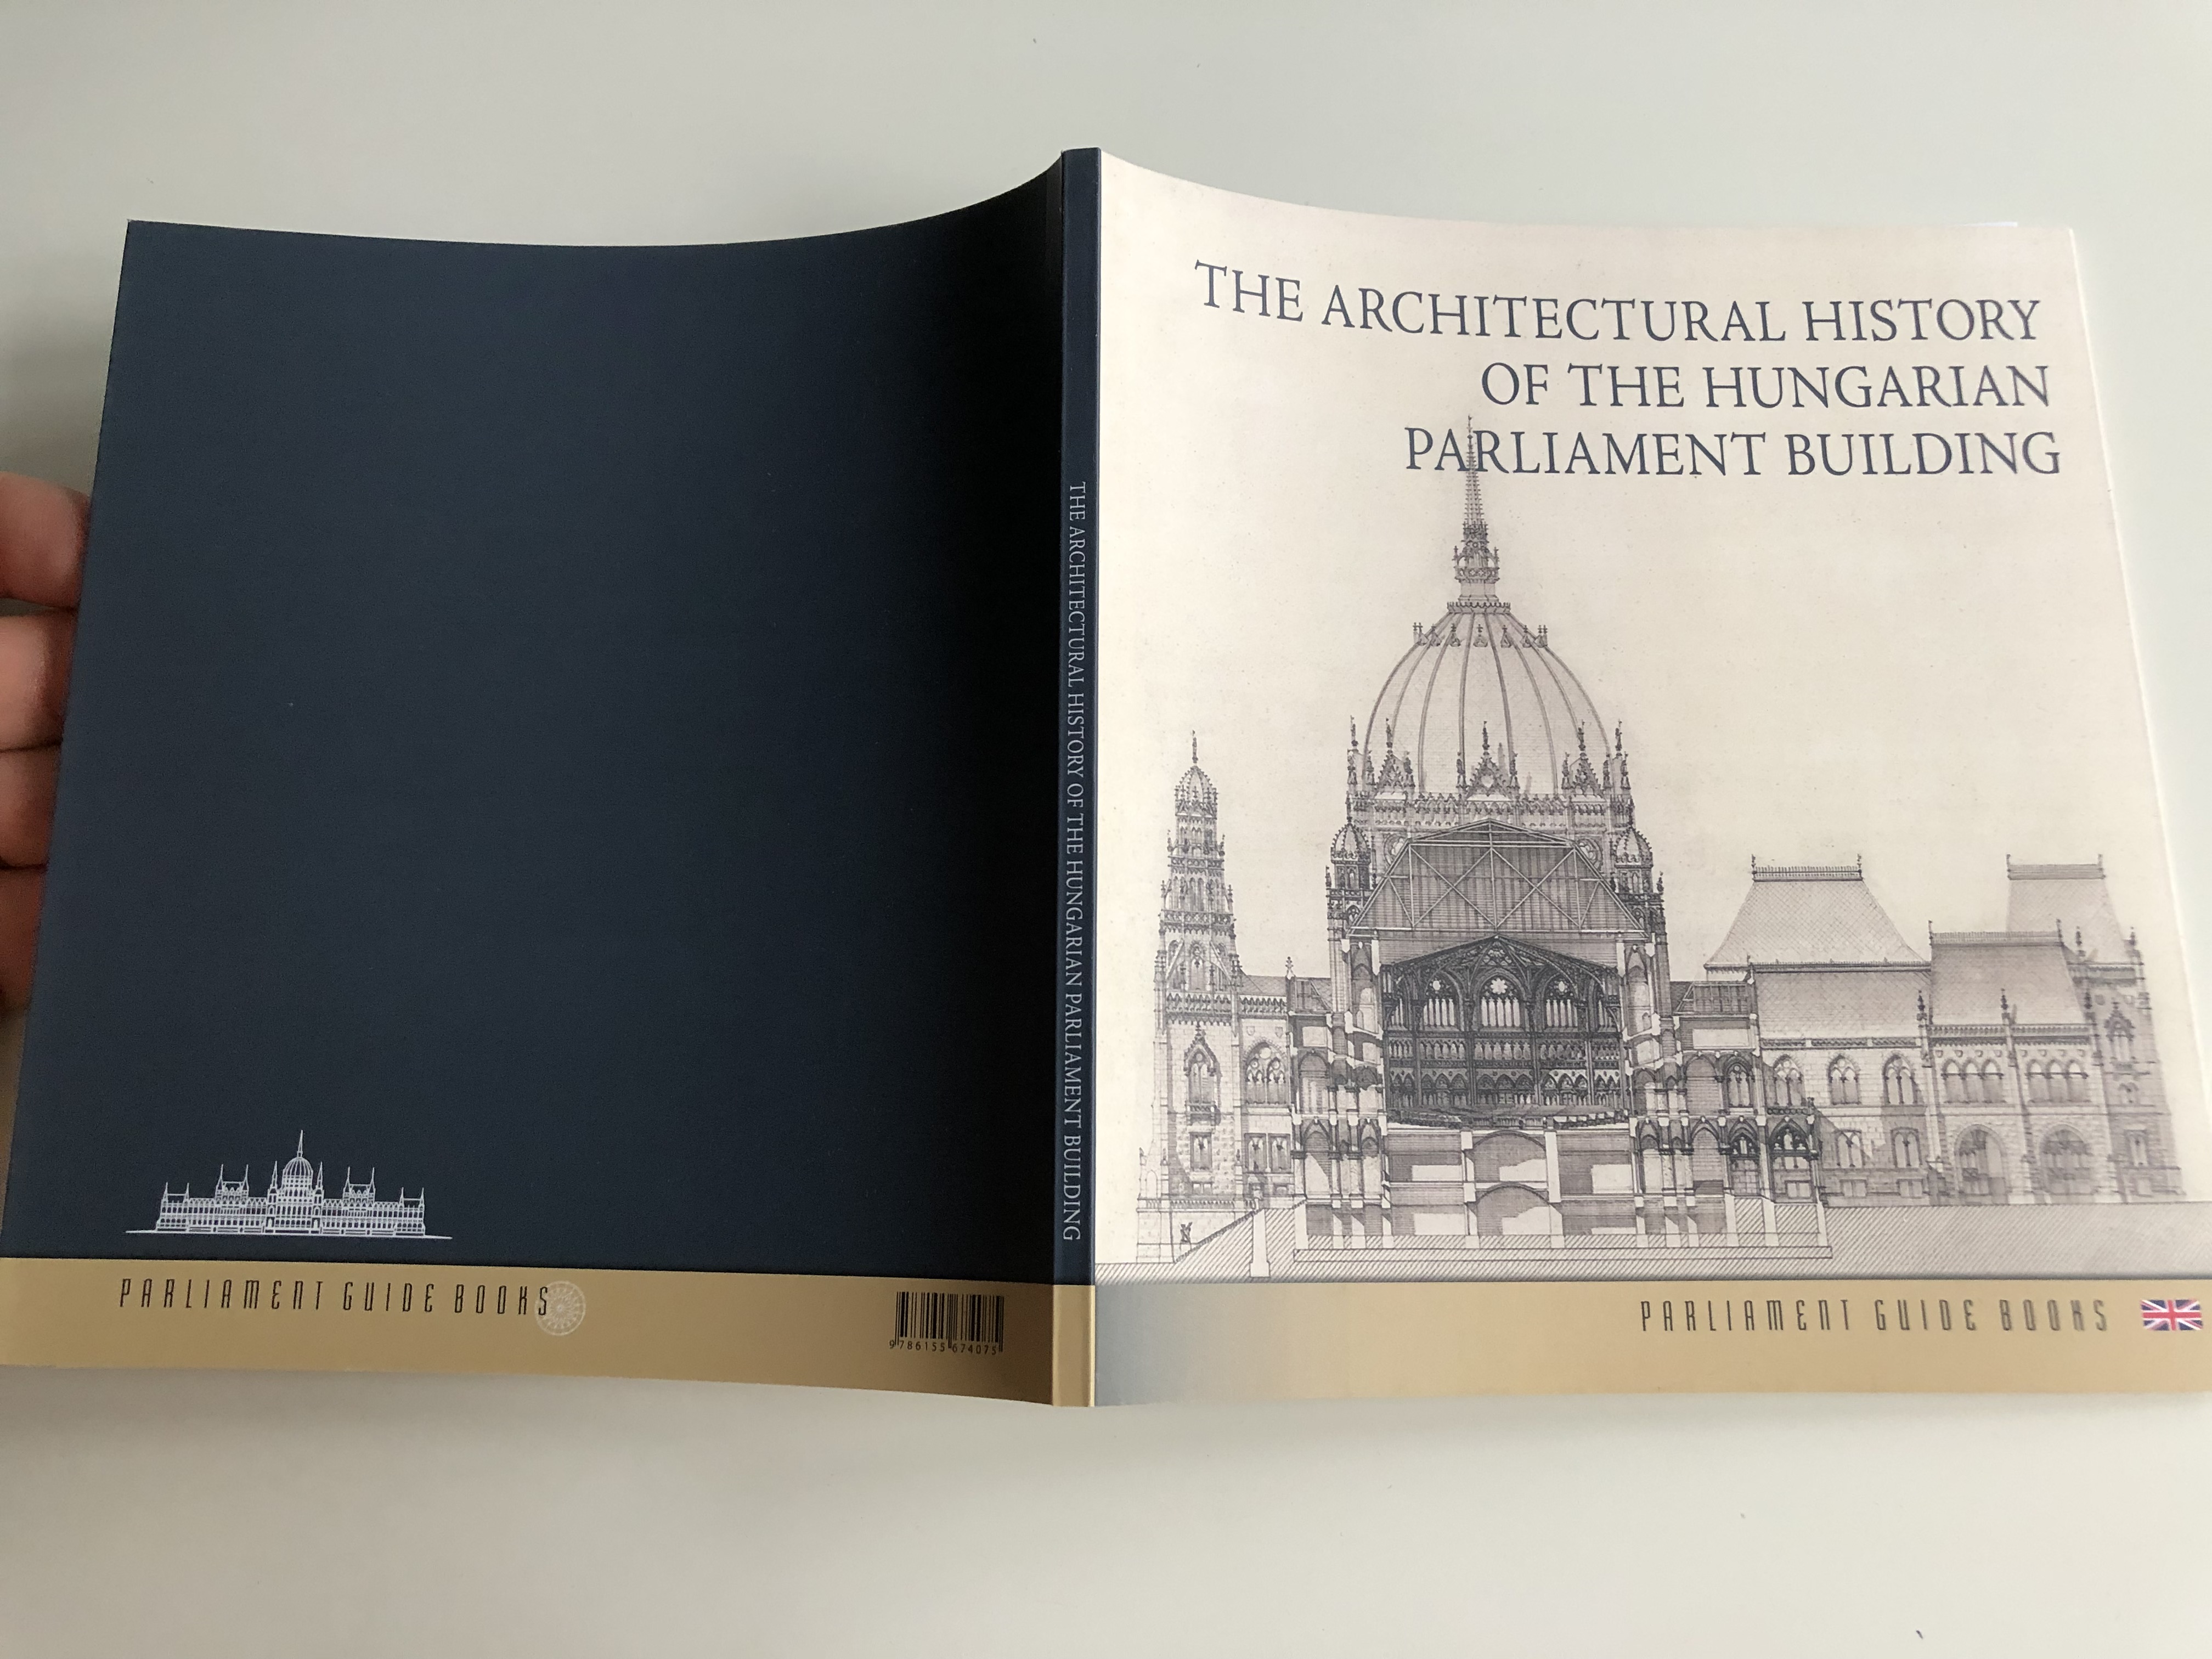 the-architectural-history-of-the-hungarian-parliament-building-by-dorottya-andr-ssy-parliament-guide-books-orsz-gh-z-kiad-2018-22-.jpg